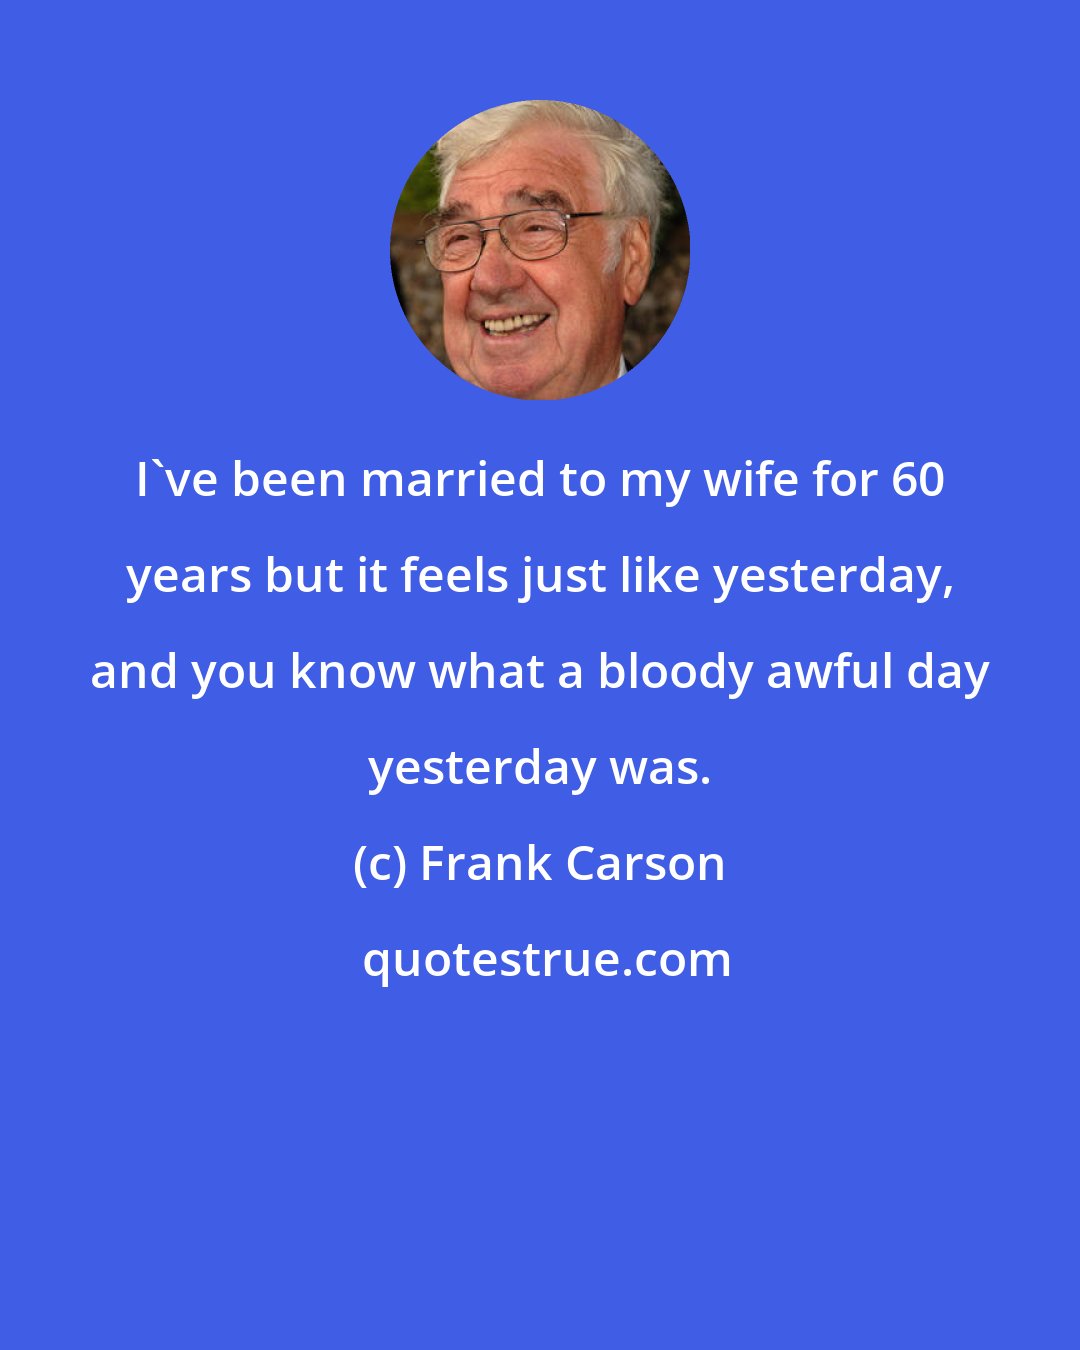 Frank Carson: I've been married to my wife for 60 years but it feels just like yesterday, and you know what a bloody awful day yesterday was.